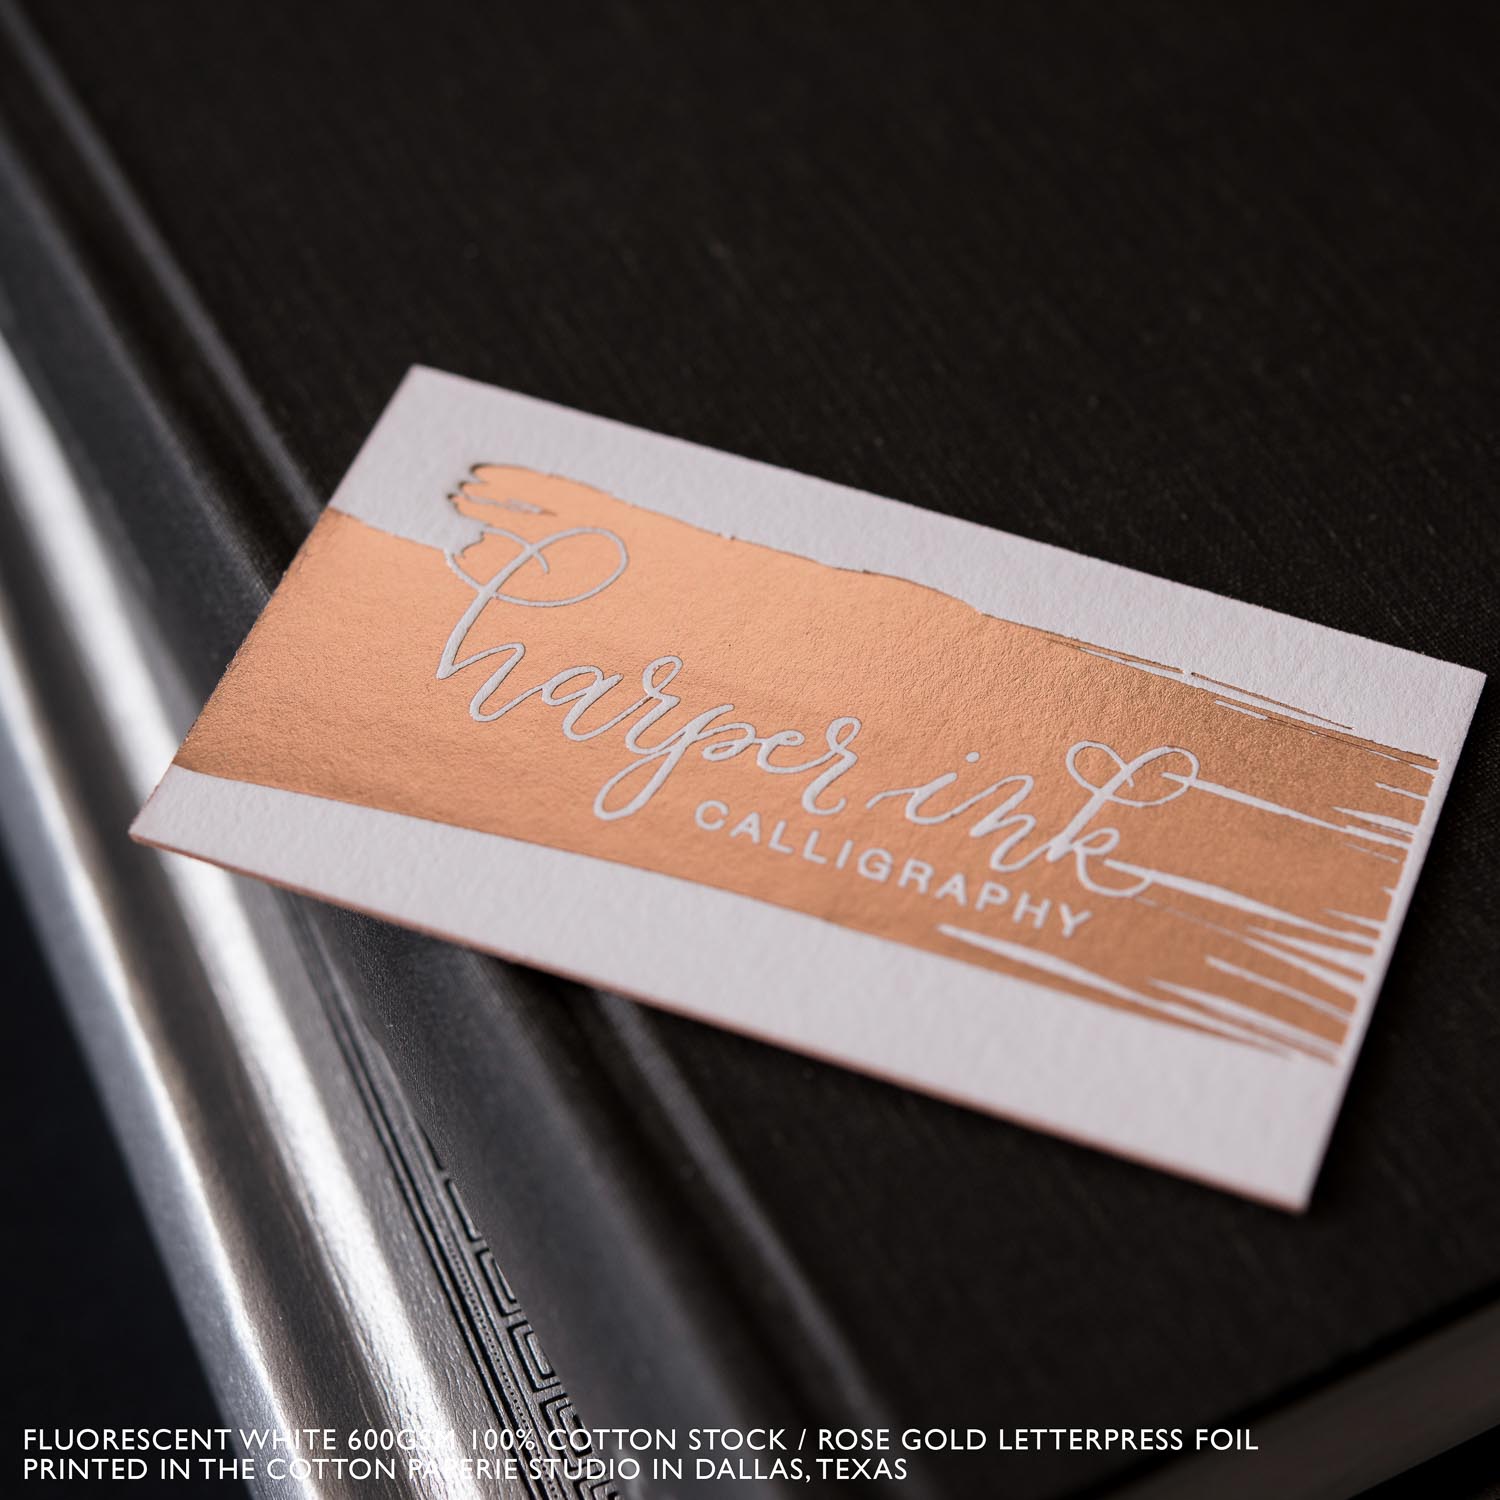 Foil Business Cards  Gold Foil Stamped Cards from $137